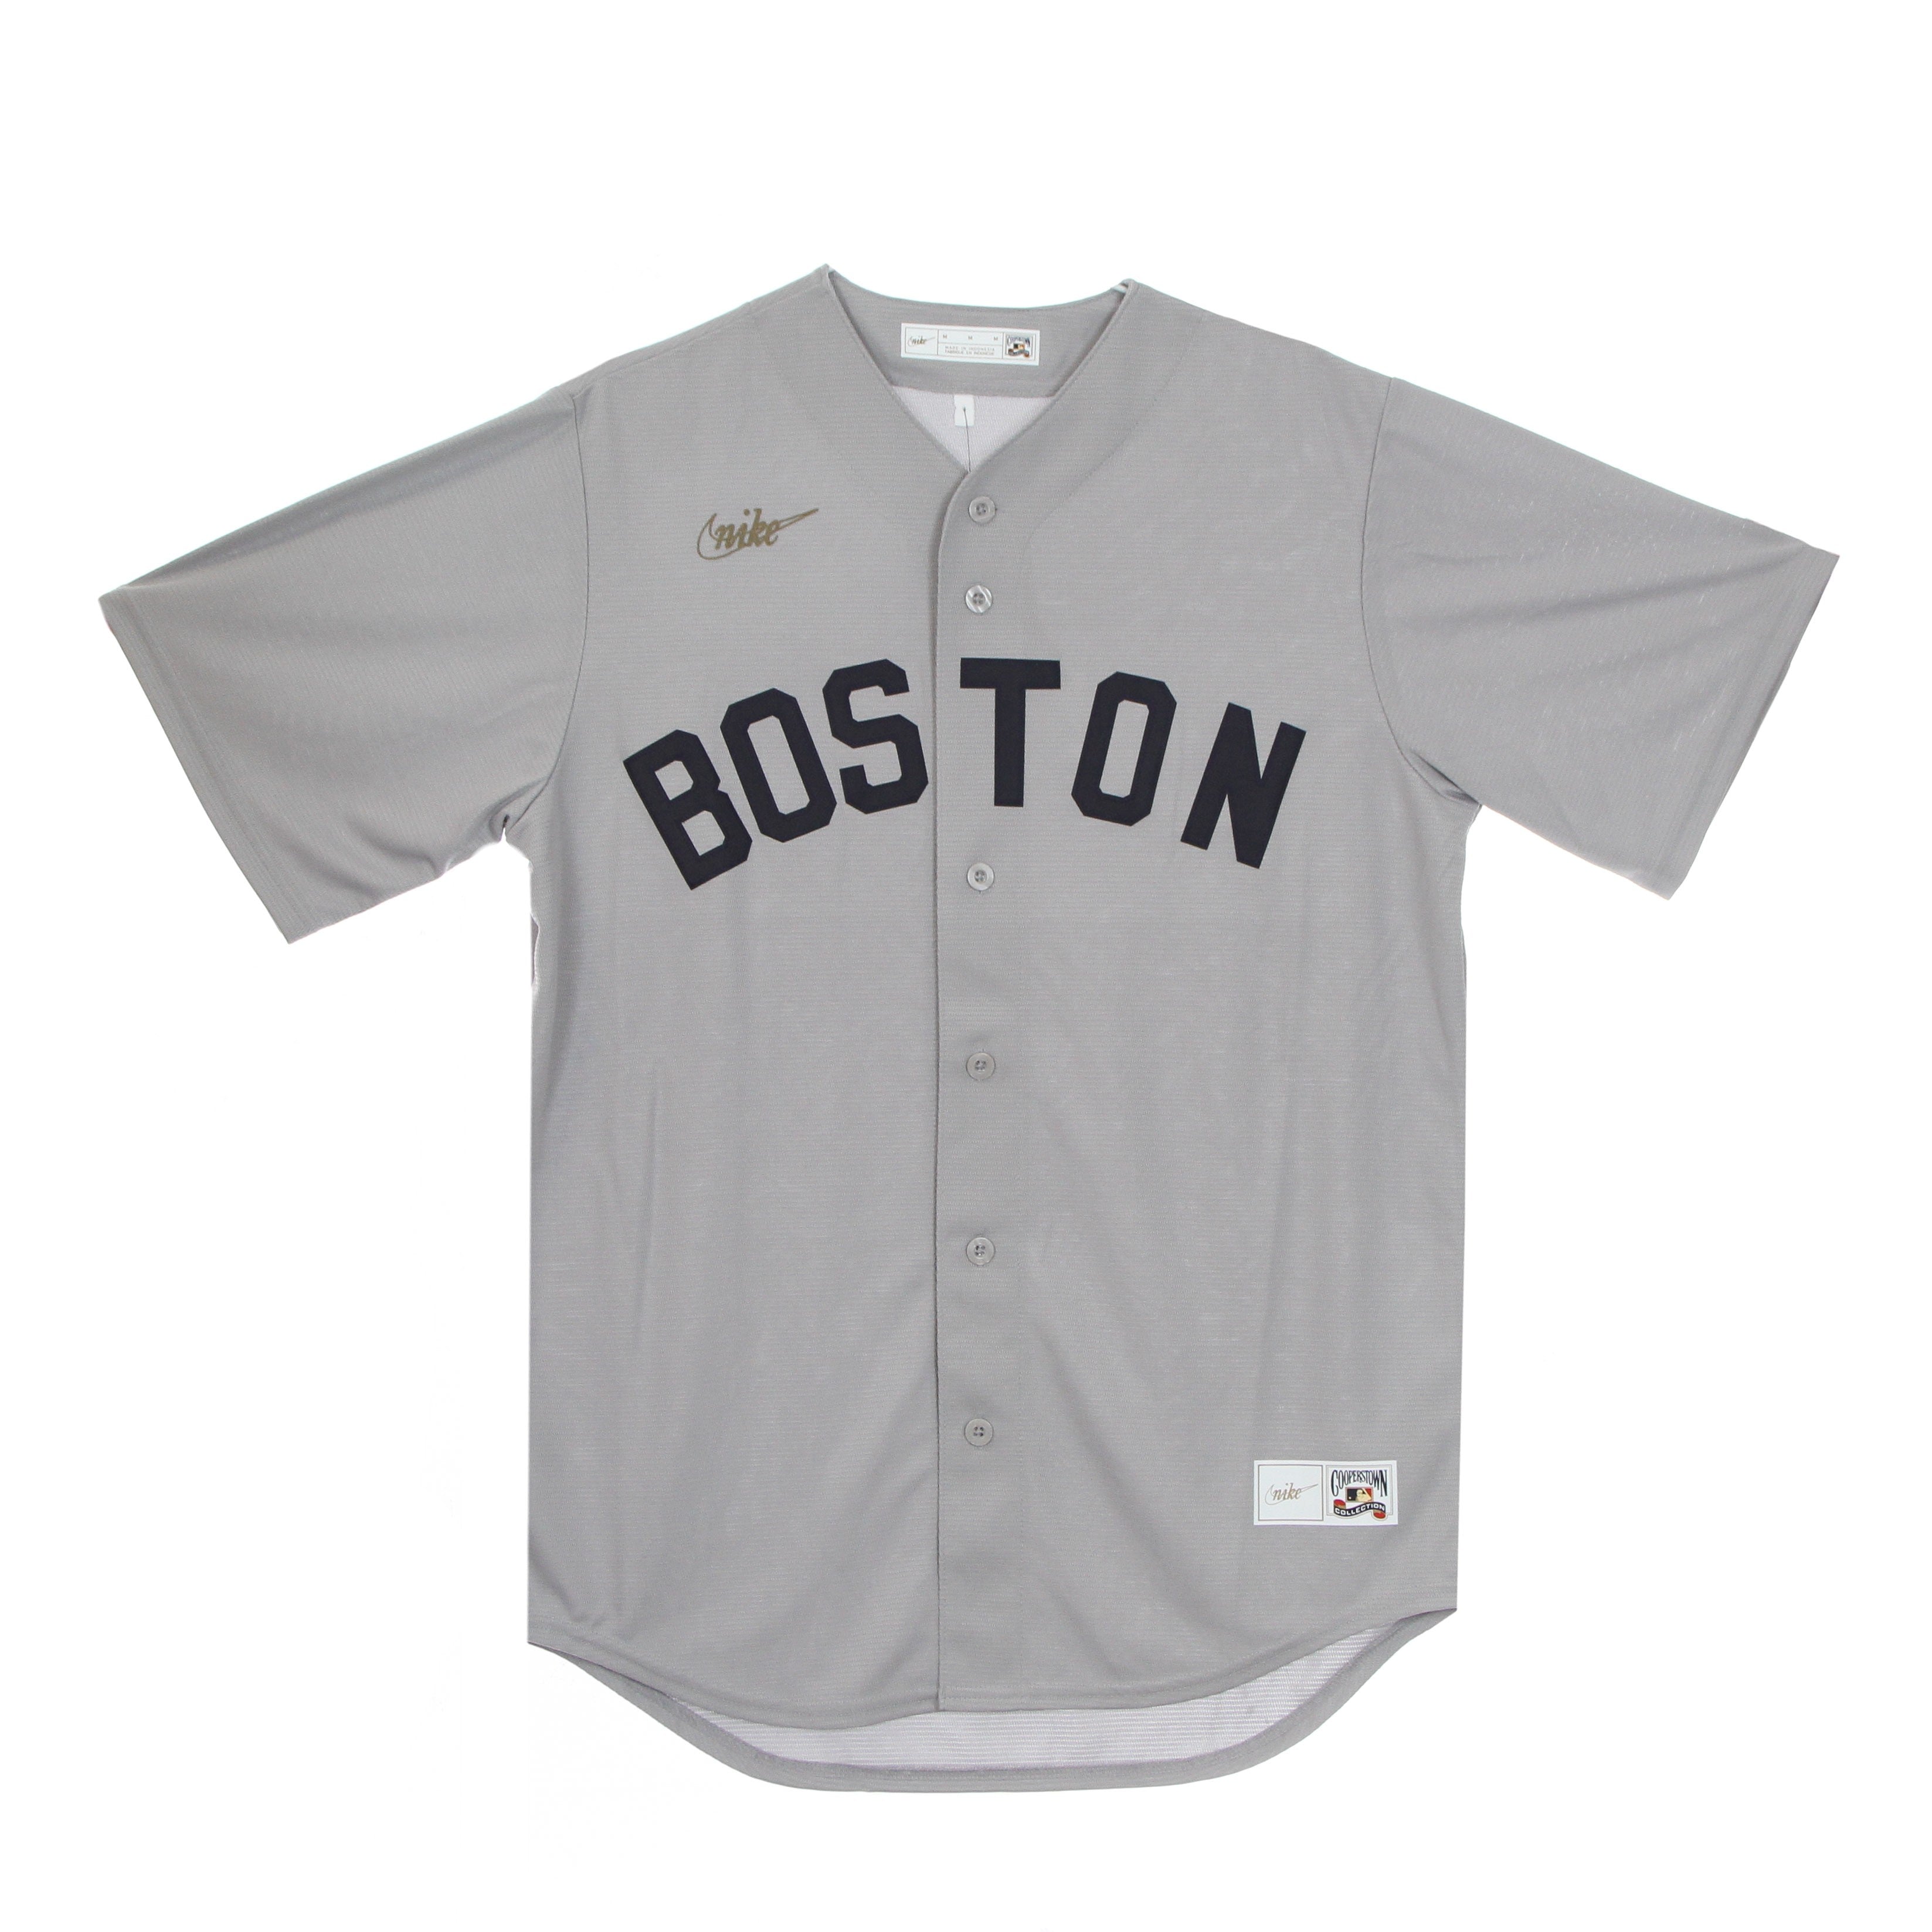 Casacca Baseball Uomo Mlb Official Cooperstown Jersey Bosred Dugout Grey